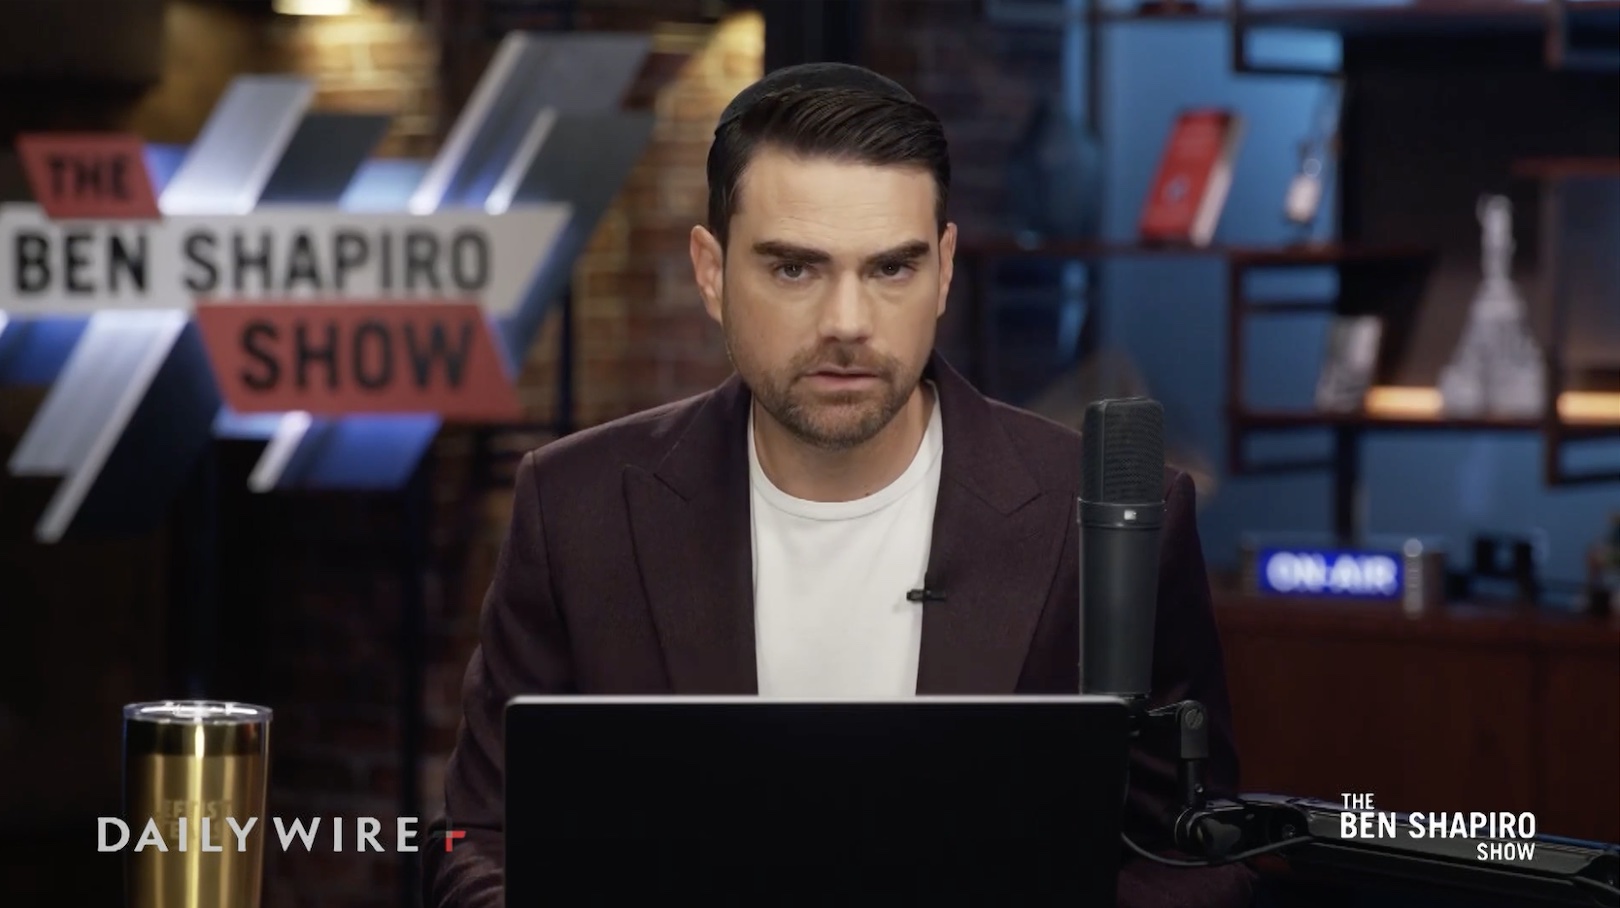 Ben Shapiro shares his thoughts on Iowa Caucuses